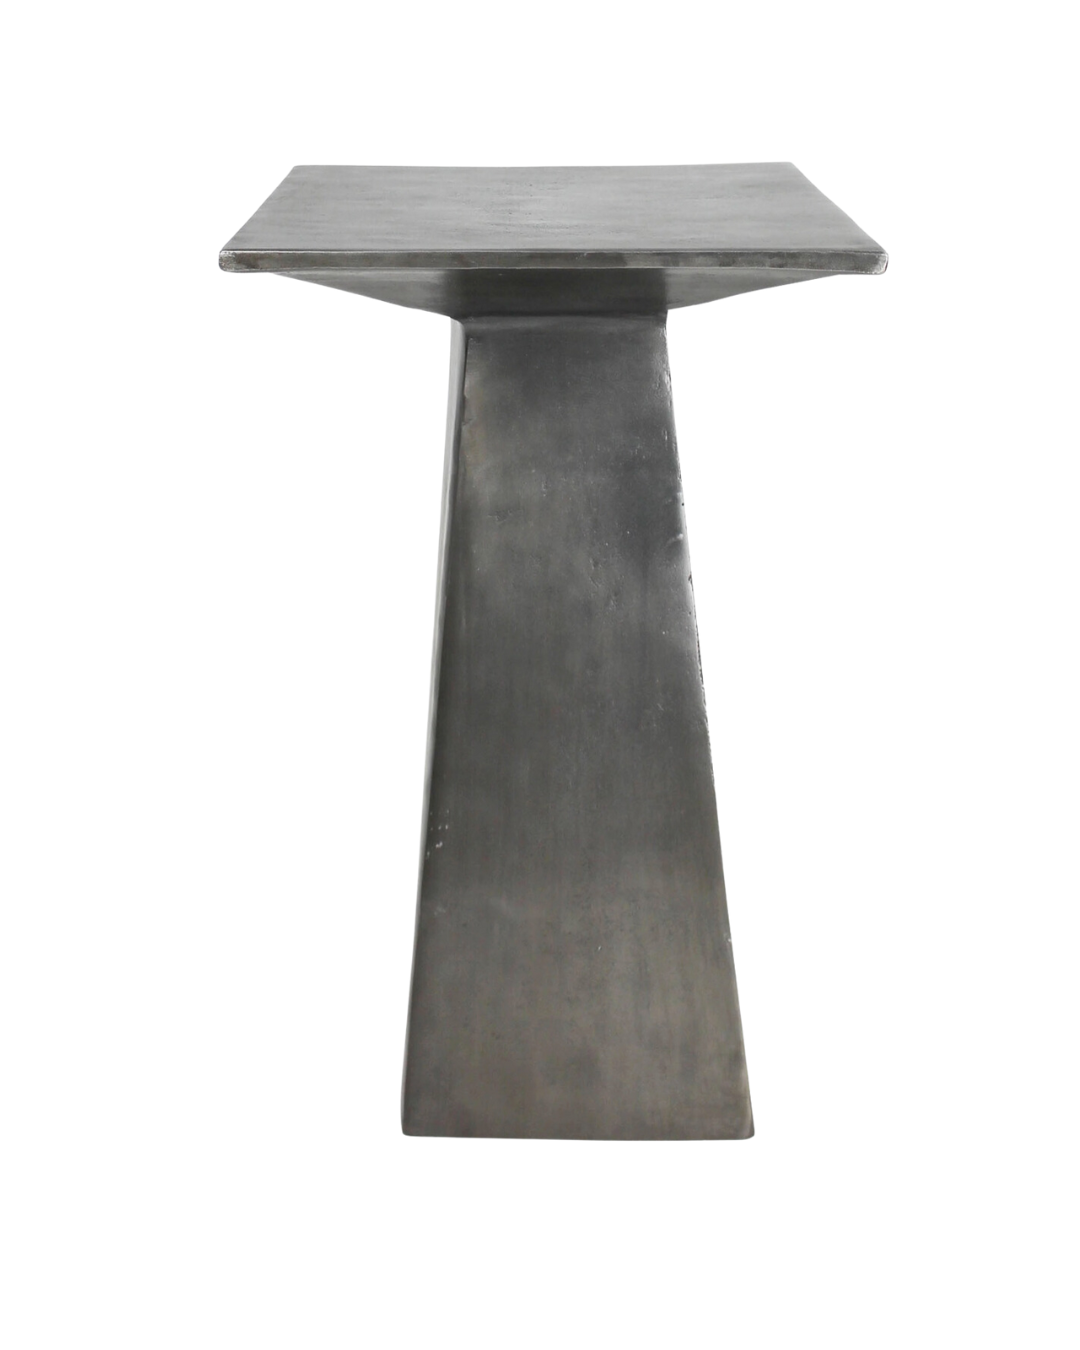 A minimalist metal Gaven Side Table with a square top and a tapered base, displayed against a white background in Scottsdale, Arizona. Brand Name: HomArt